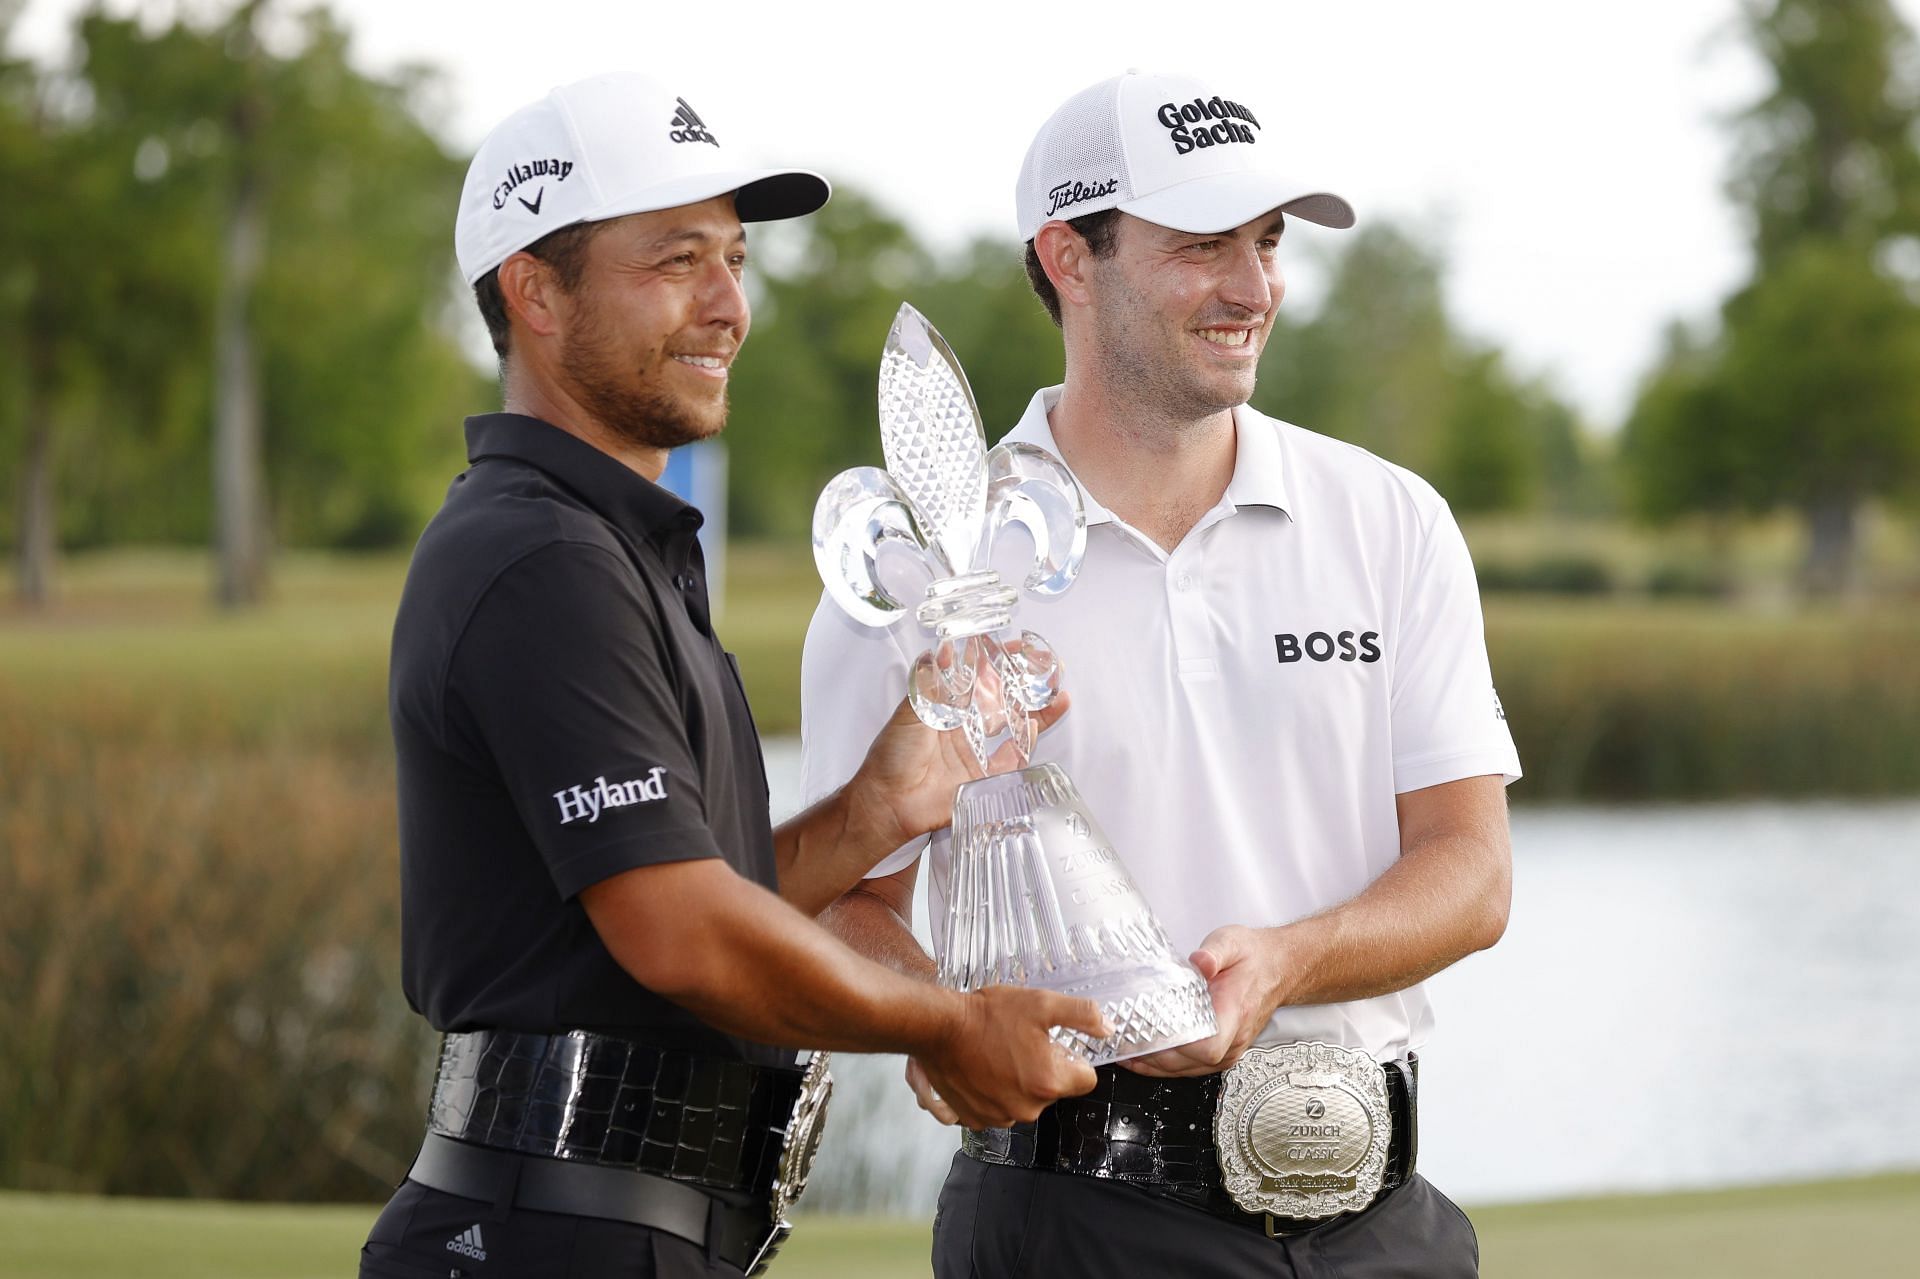 Xander Schauffele and Patrick Cantlay are defending champions at the Zurich Classic of New Orleans